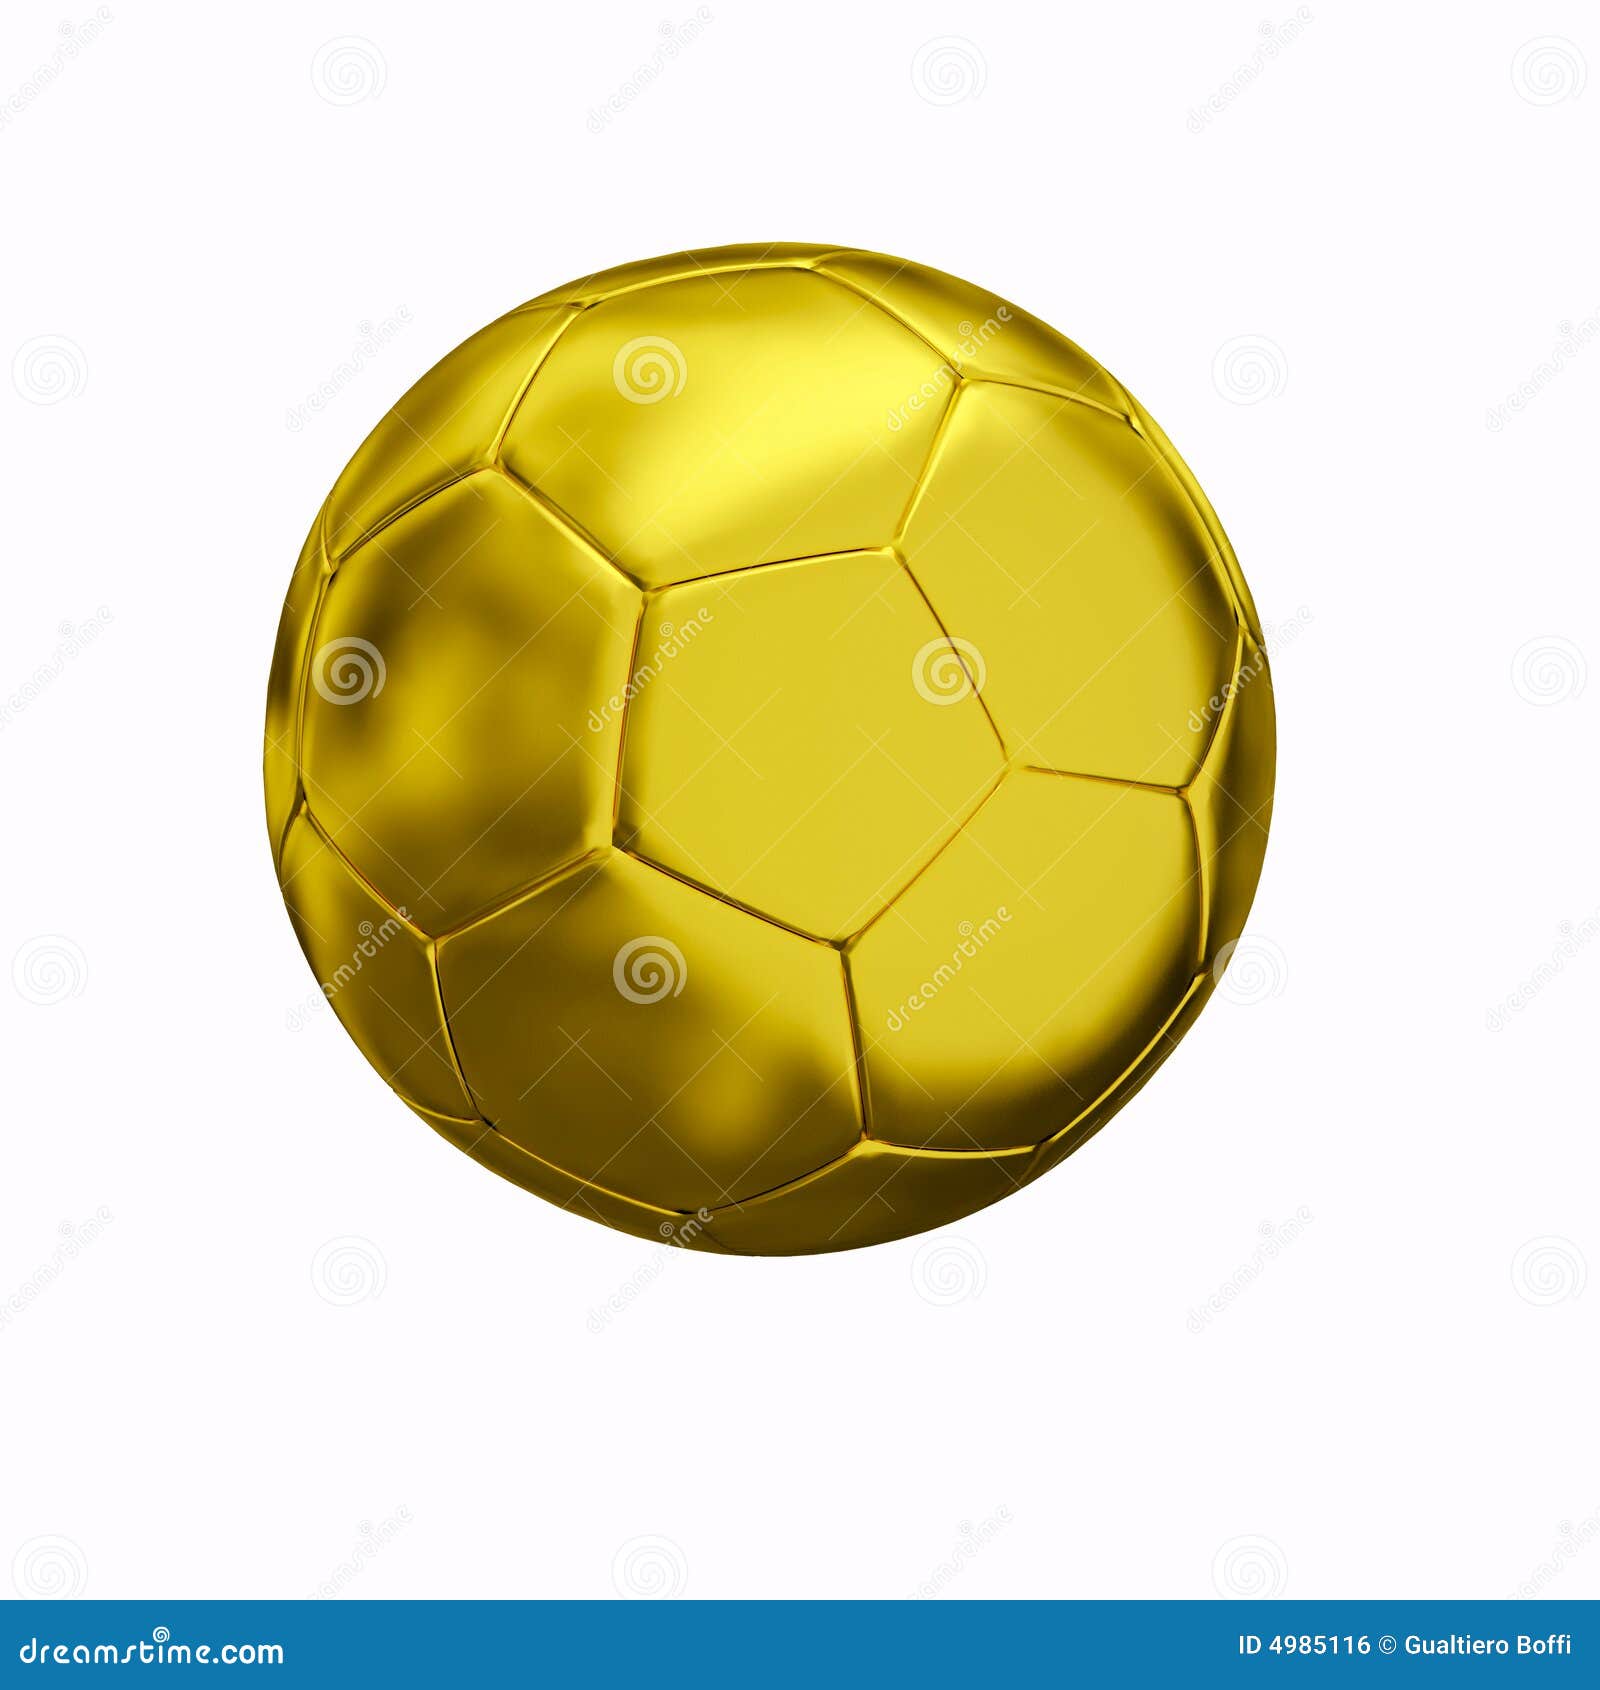 Isolated Gold Soccer Ball Royalty Free Stock Image - Image: 4985116